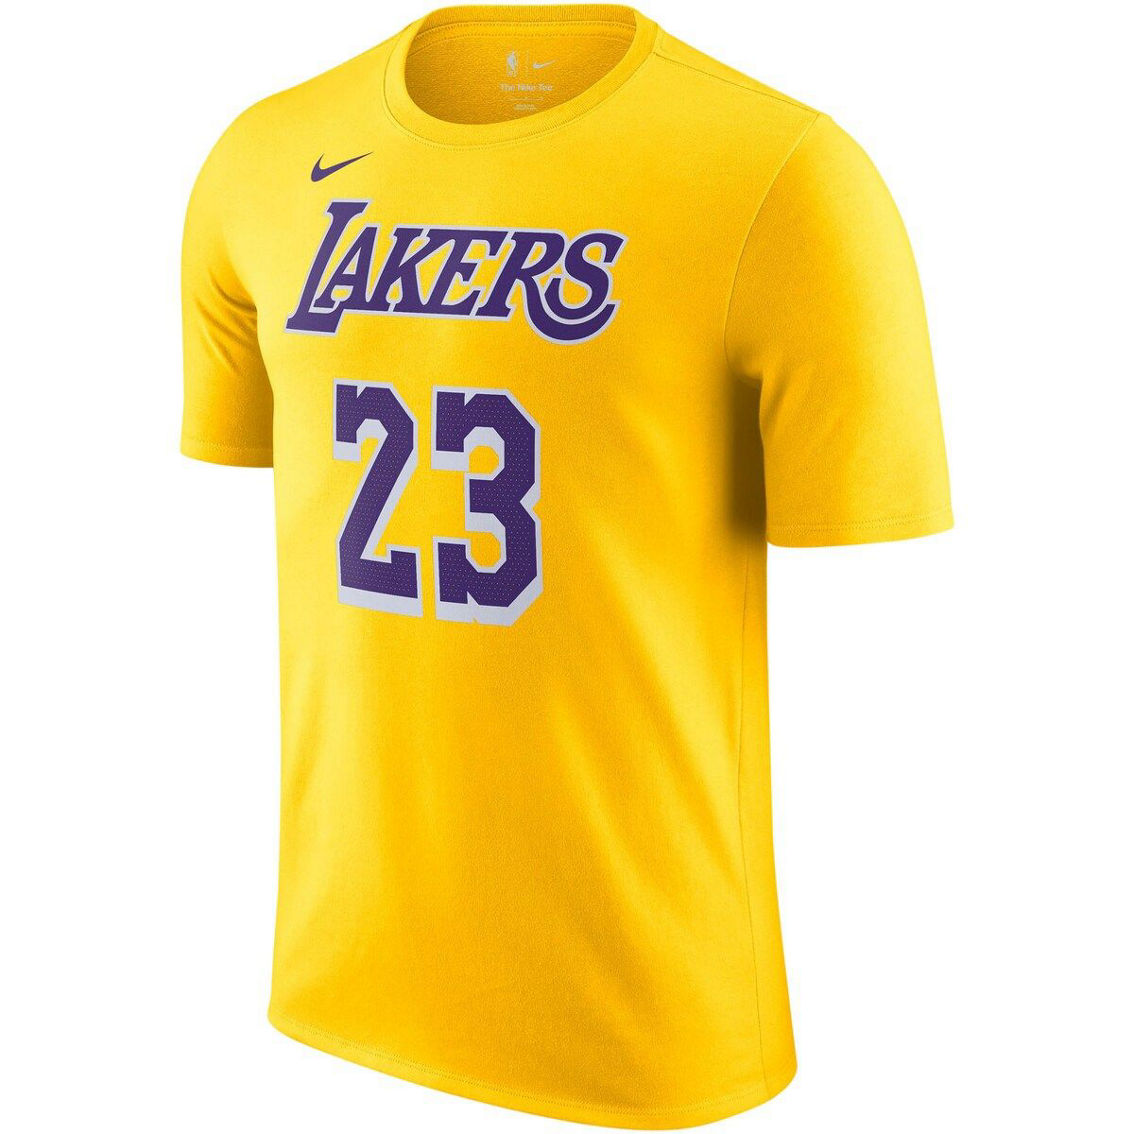 Nike Men's LeBron James Gold Los Angeles Lakers Icon 2022/23 Name & Number T-Shirt - Image 3 of 4